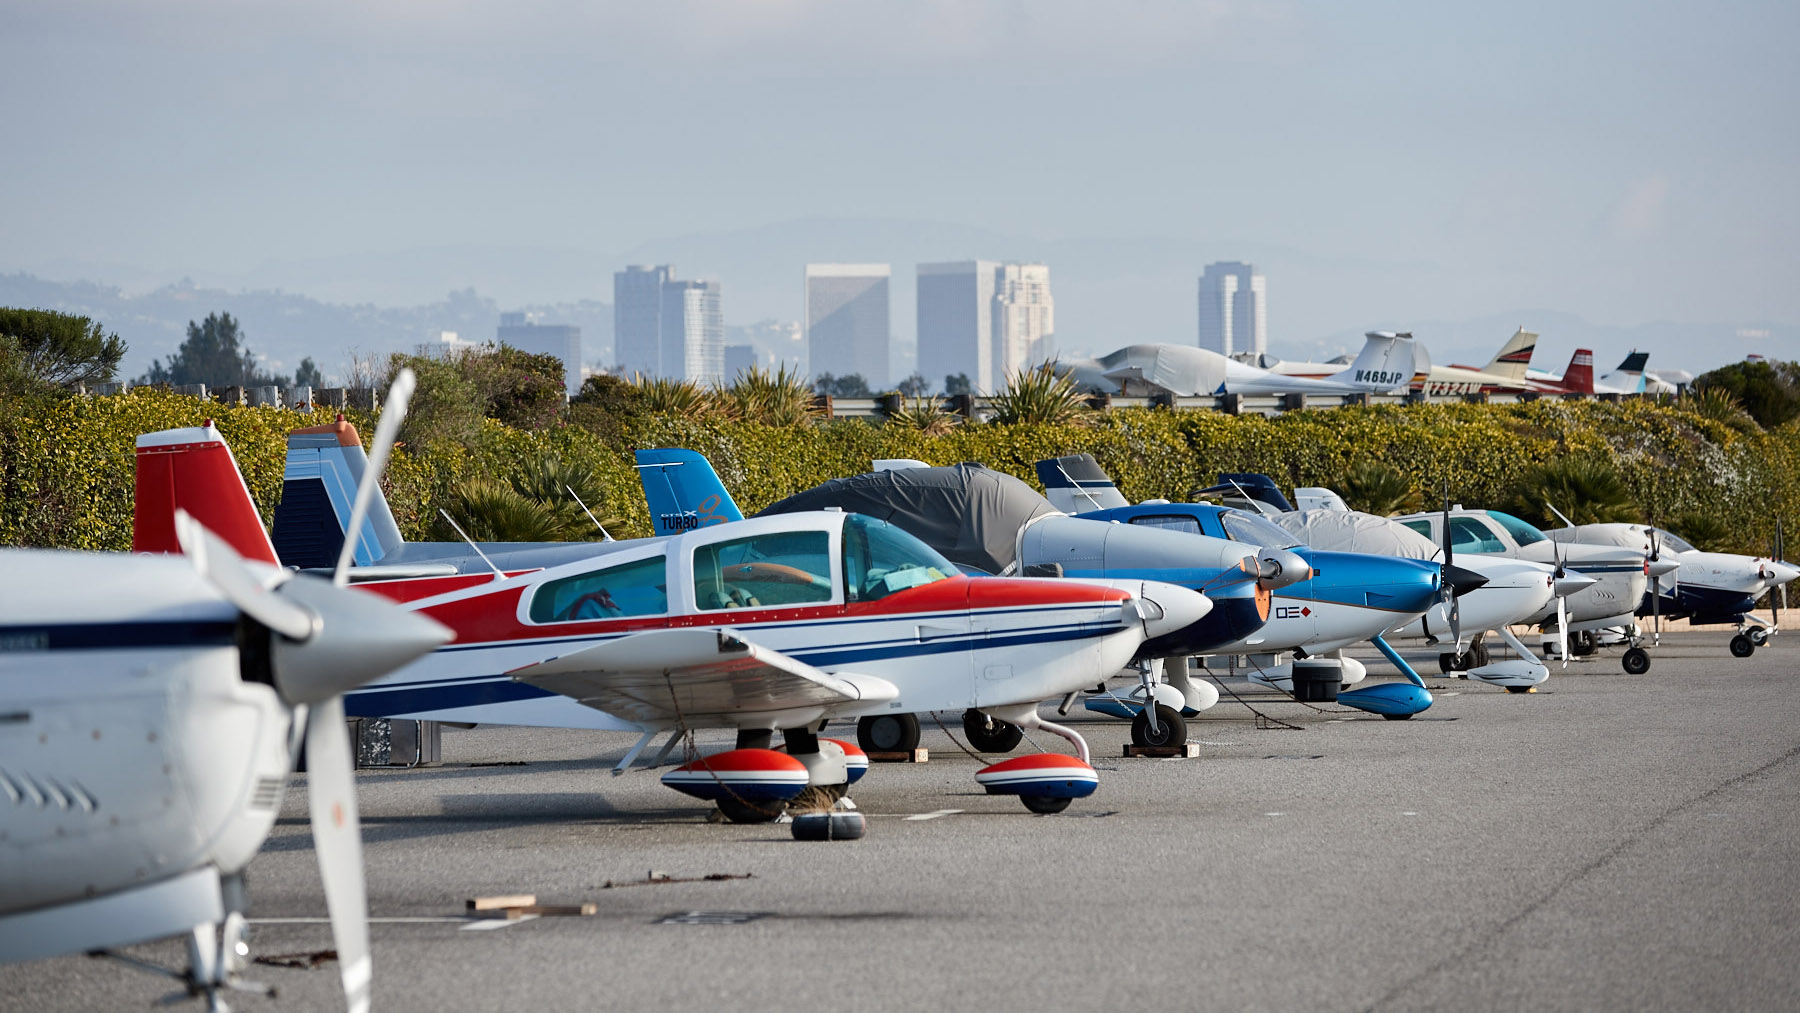 American Flyers to exit Santa Monica in April - AOPA